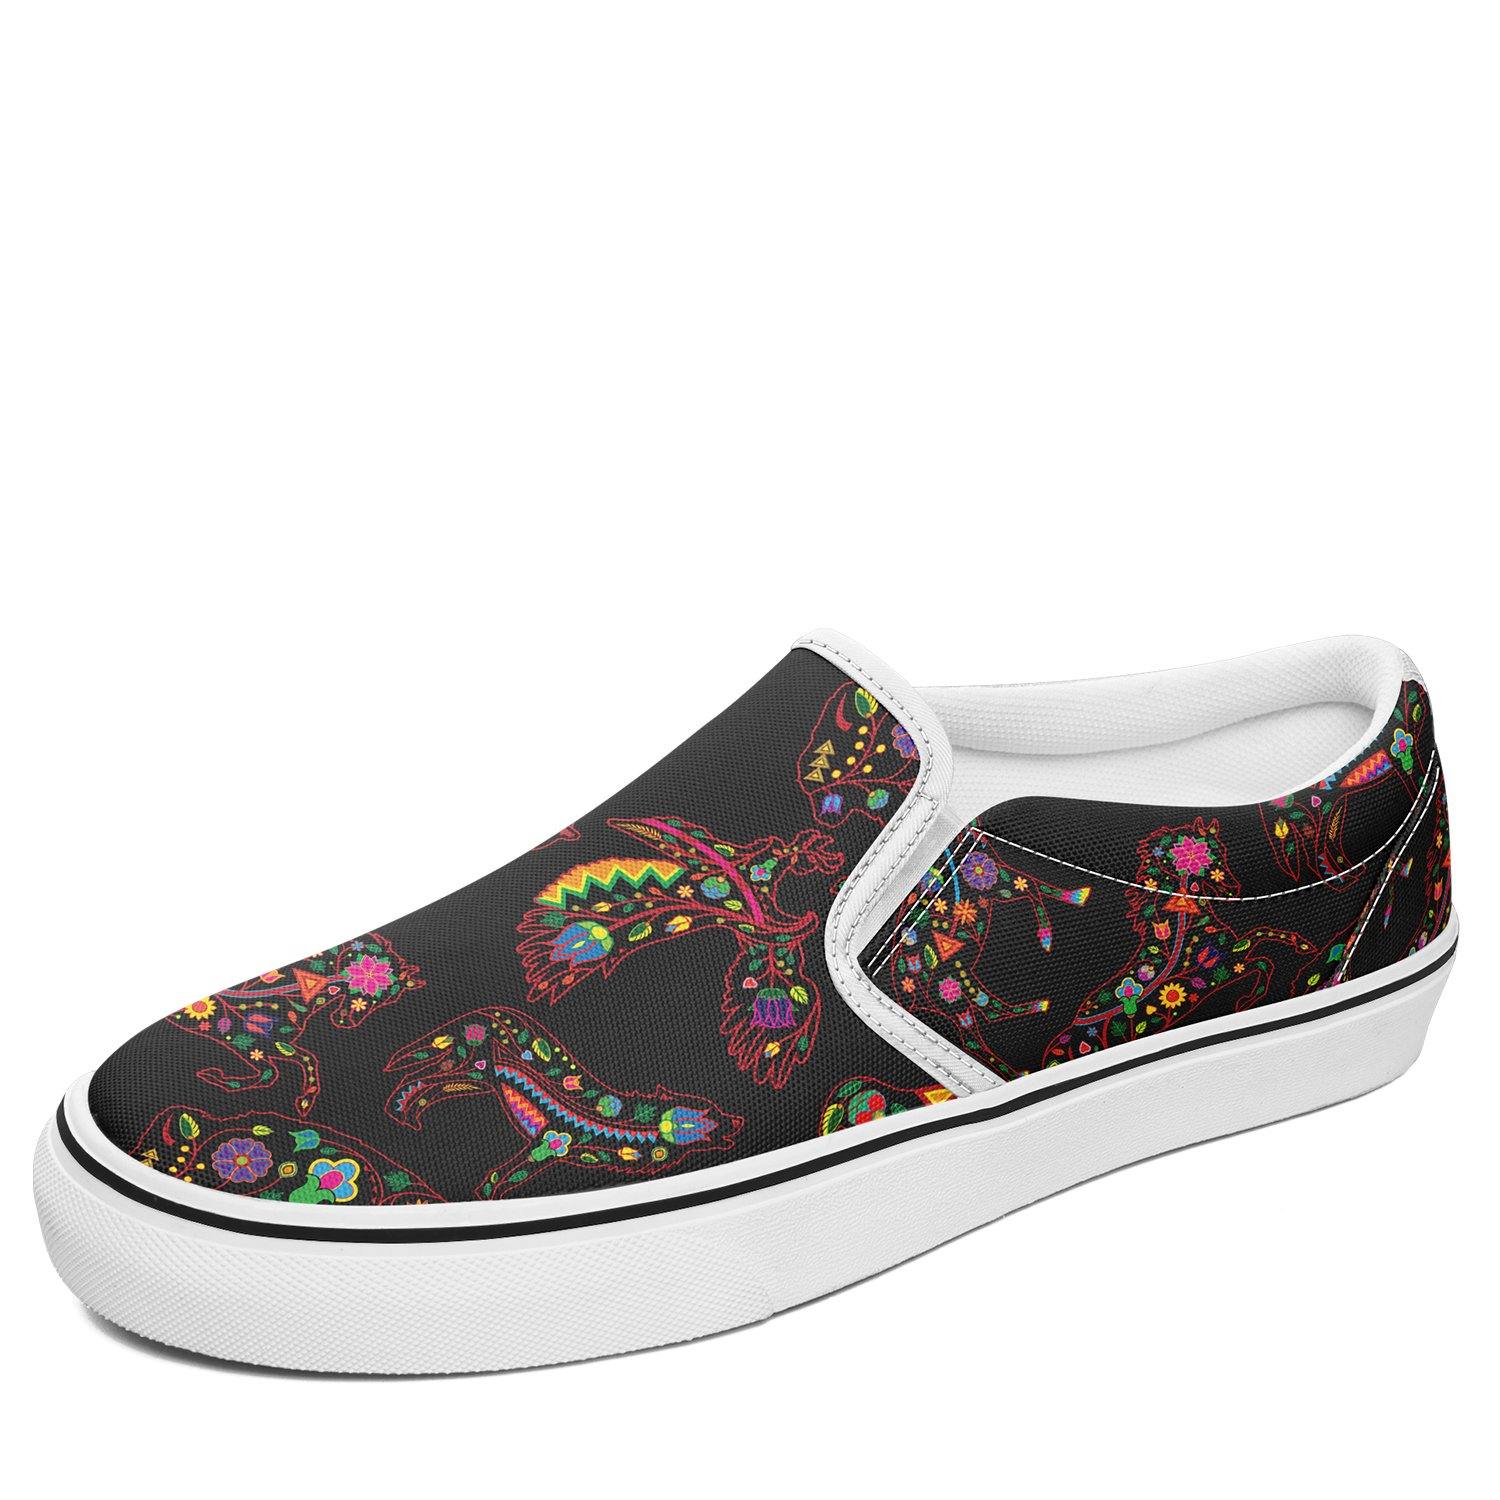 Floral Animals Otoyimm Canvas Slip On Shoes otoyimm Herman 